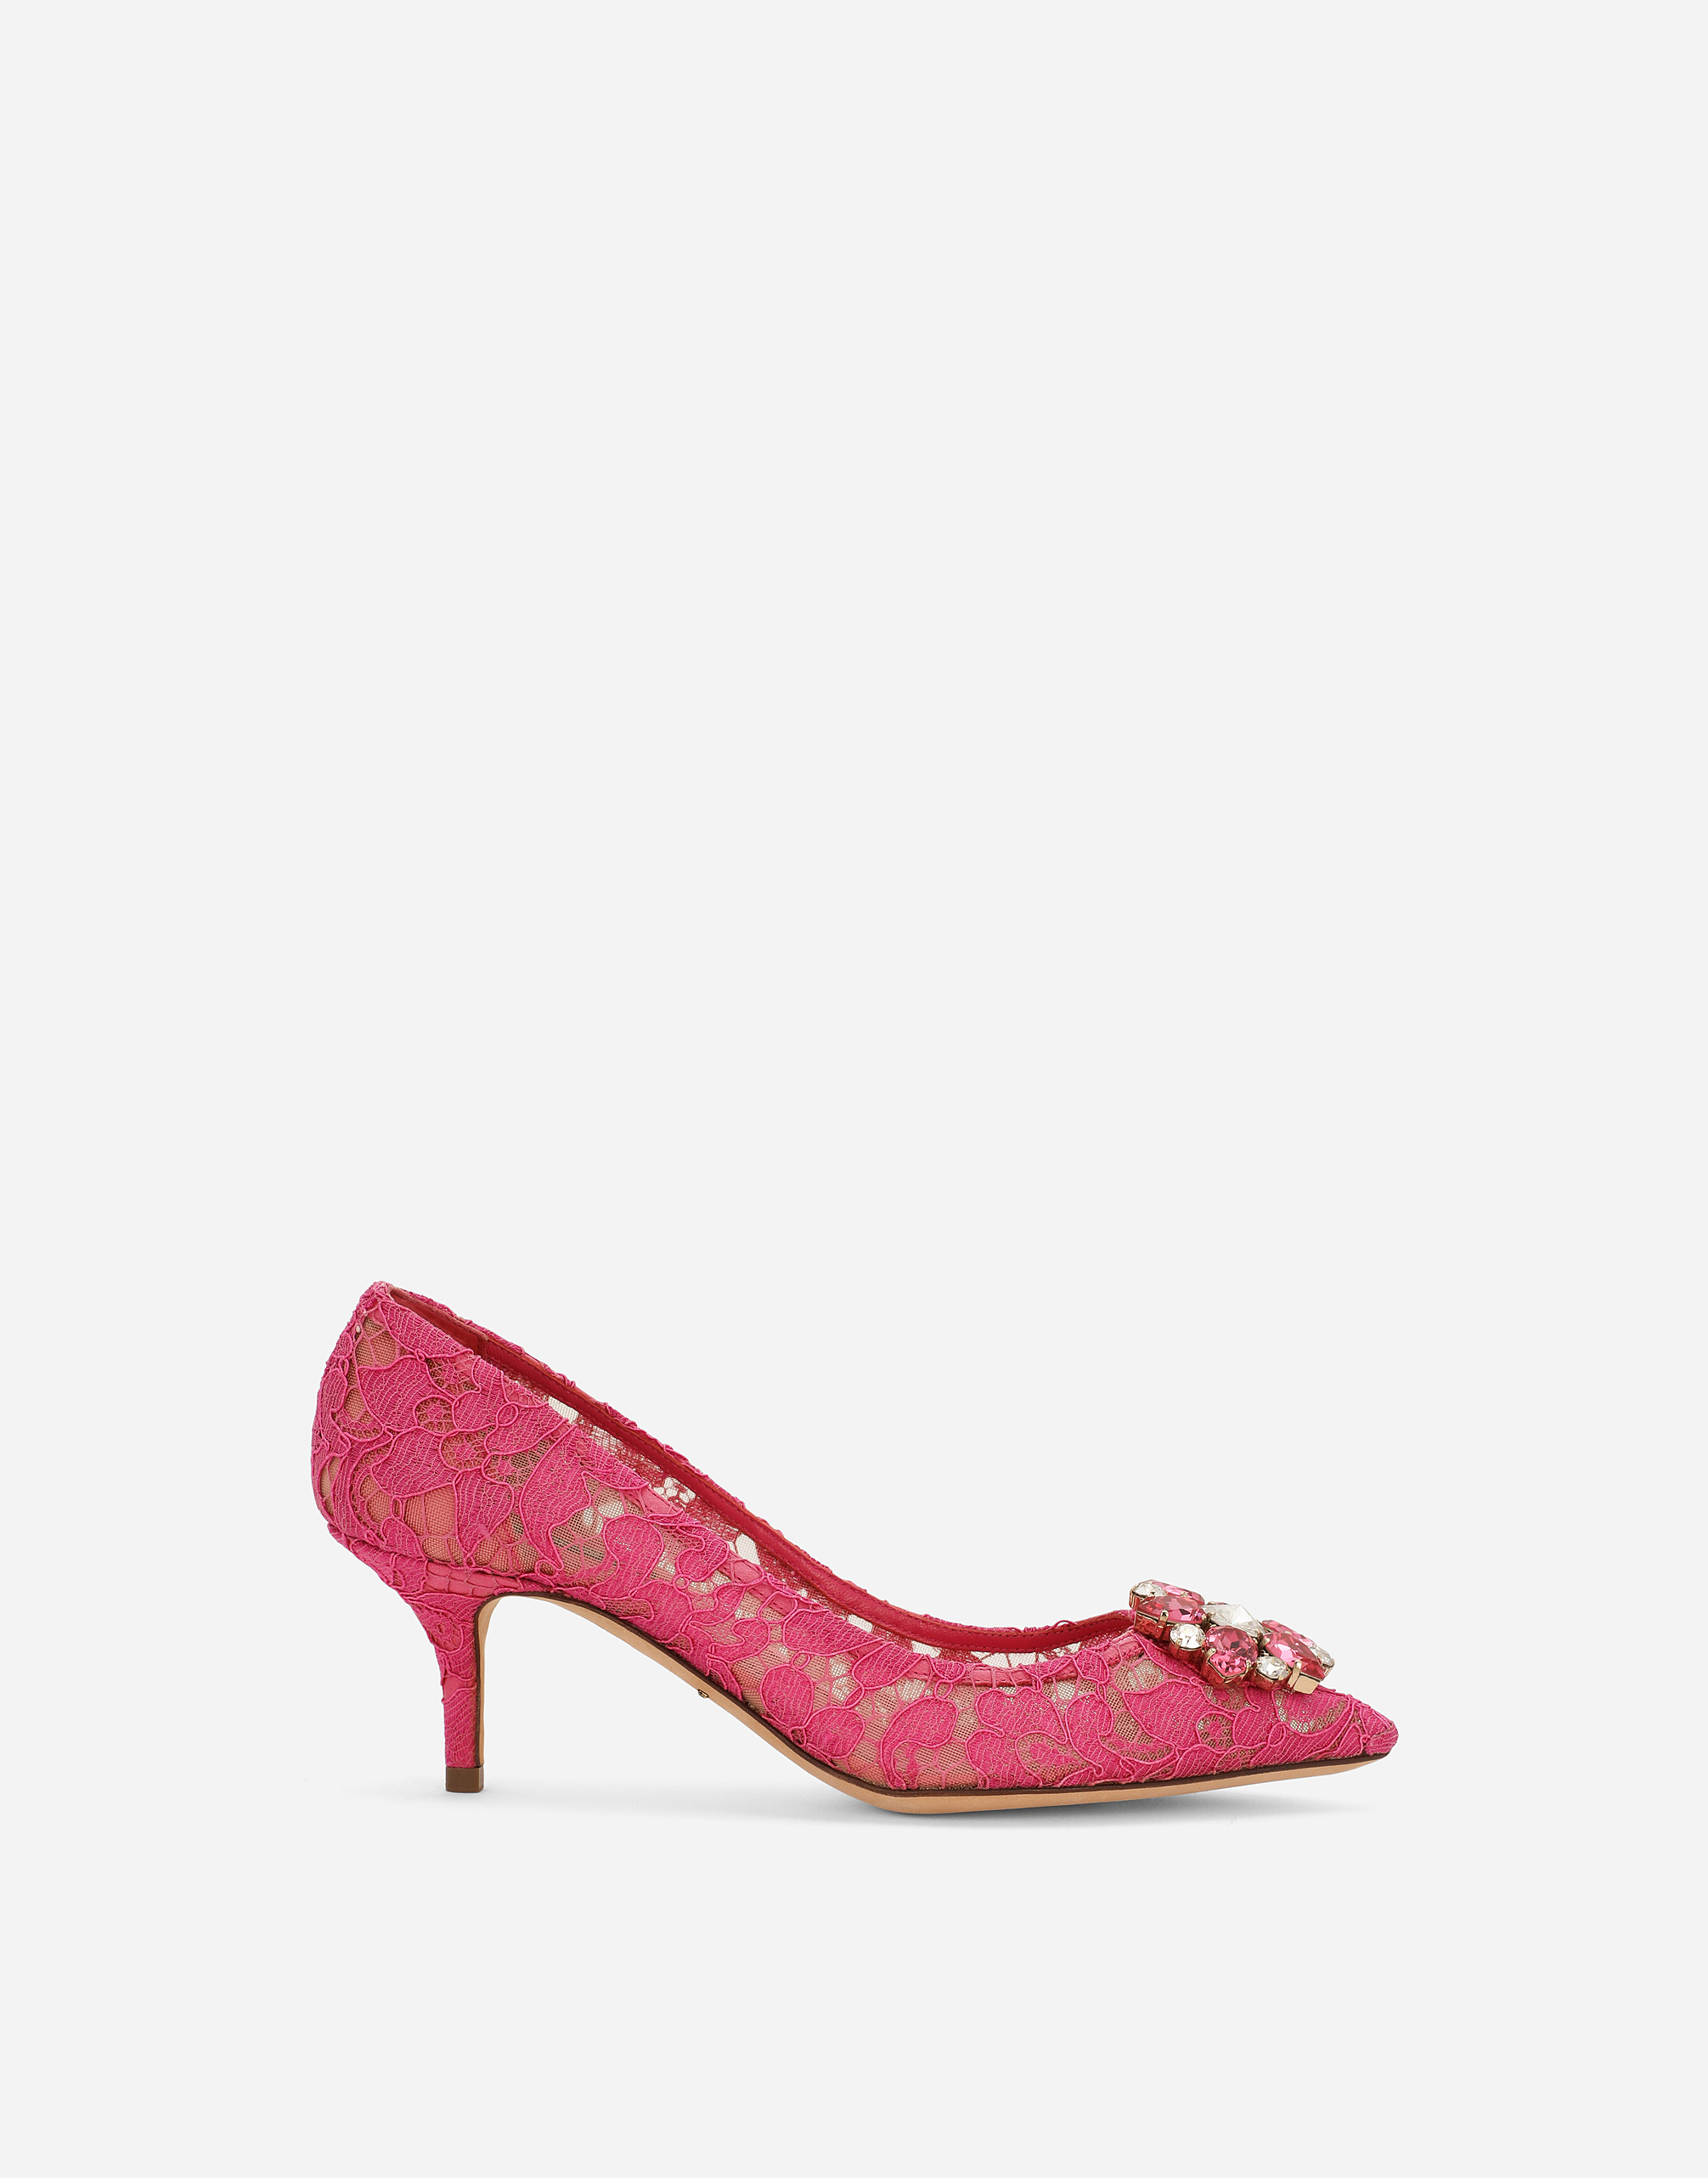 Lace rainbow pumps with brooch detailing in Fuchsia